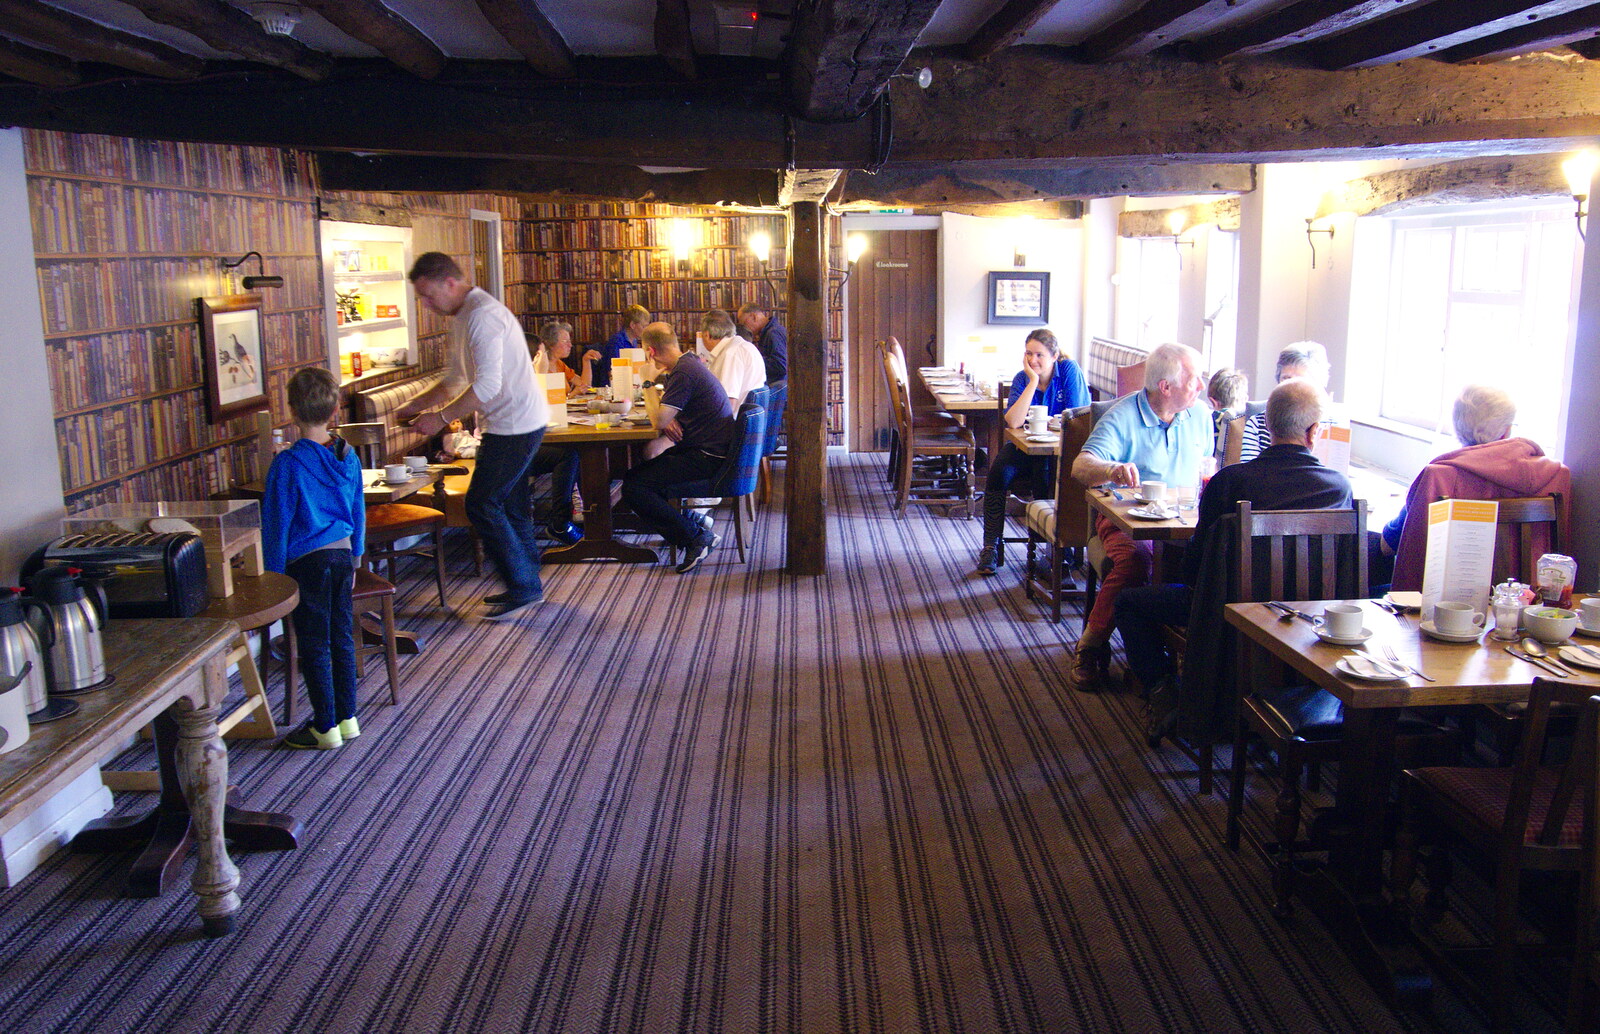 We have the whole dining room to ourselves from The BSCC Bike Ride 2019, Coggeshall, Essex - 11th May 2019